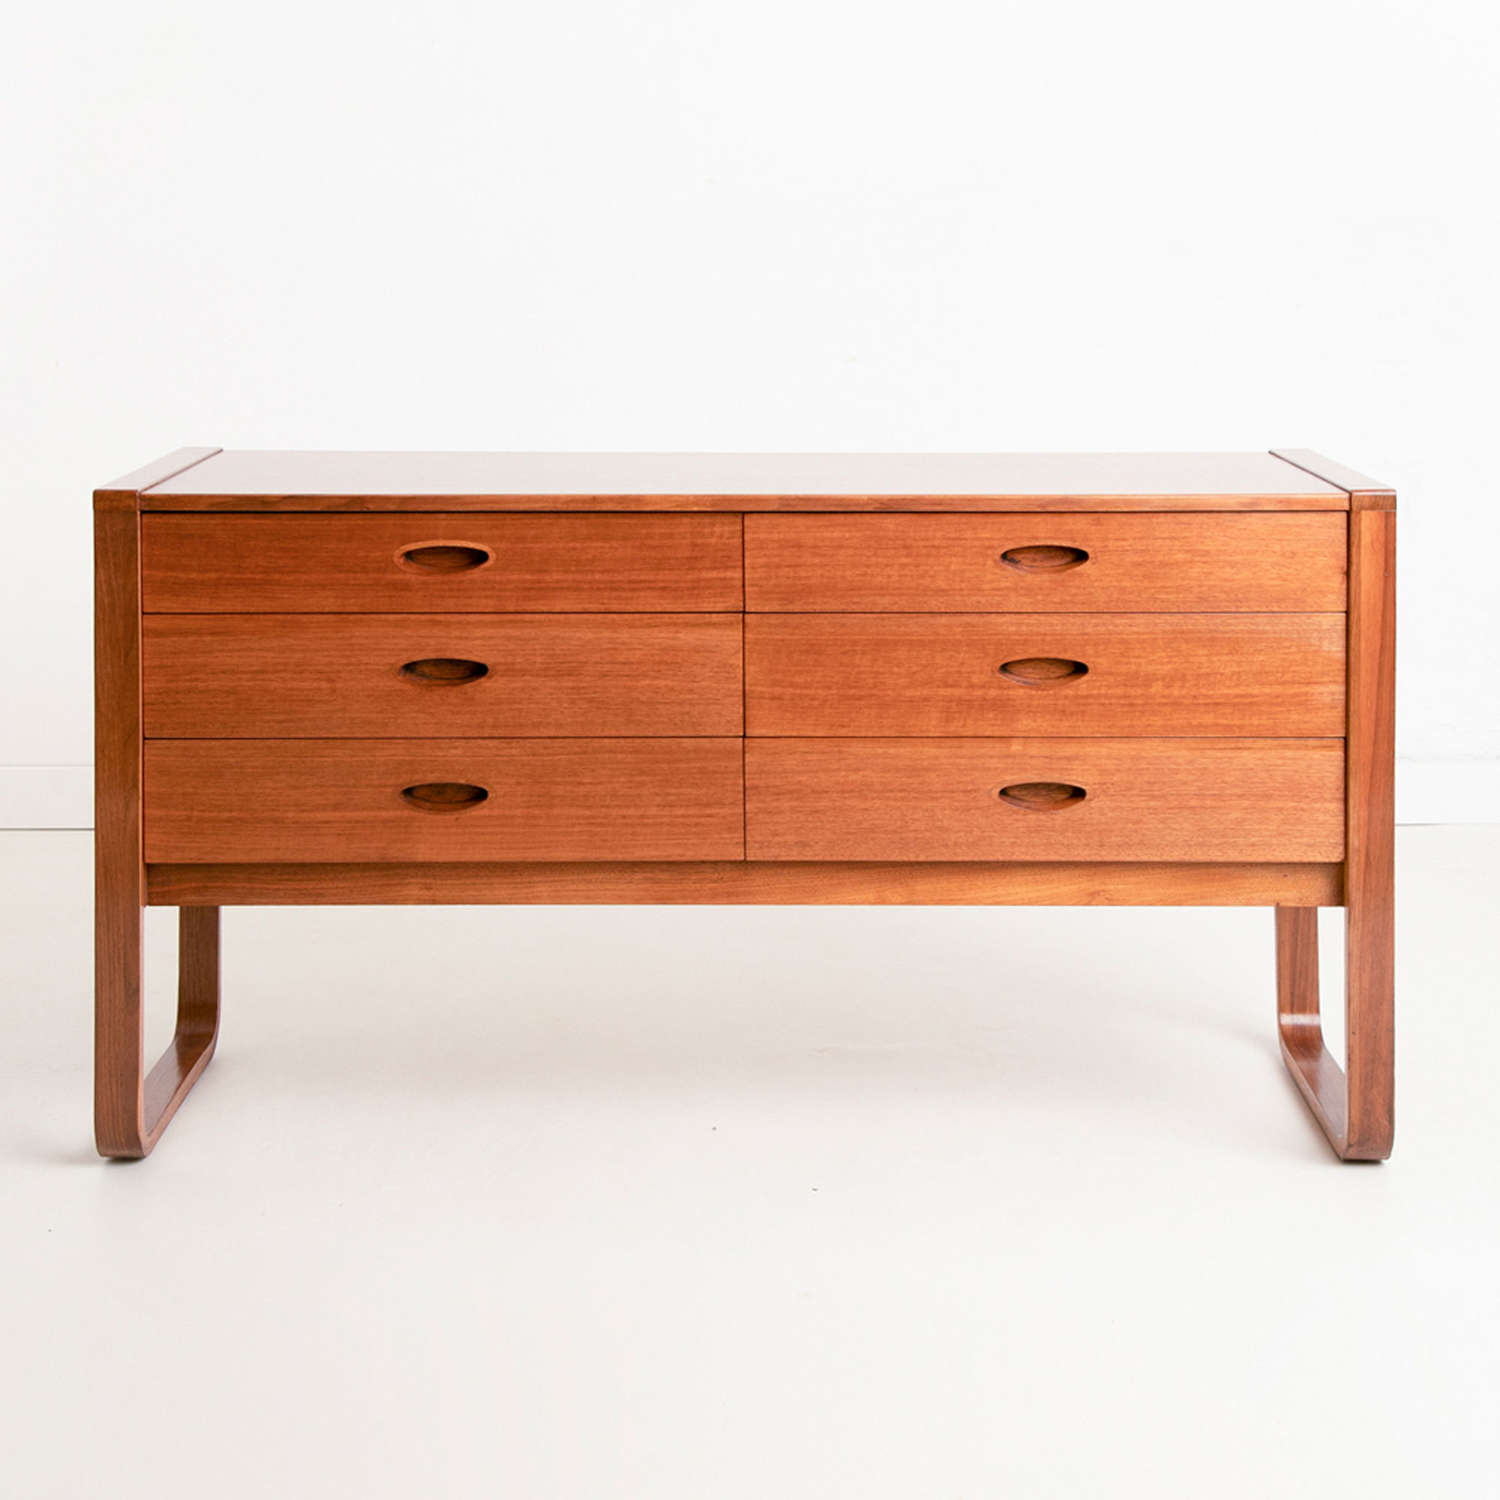 Midcentury Chest of Drawers by Uniflex c.1965